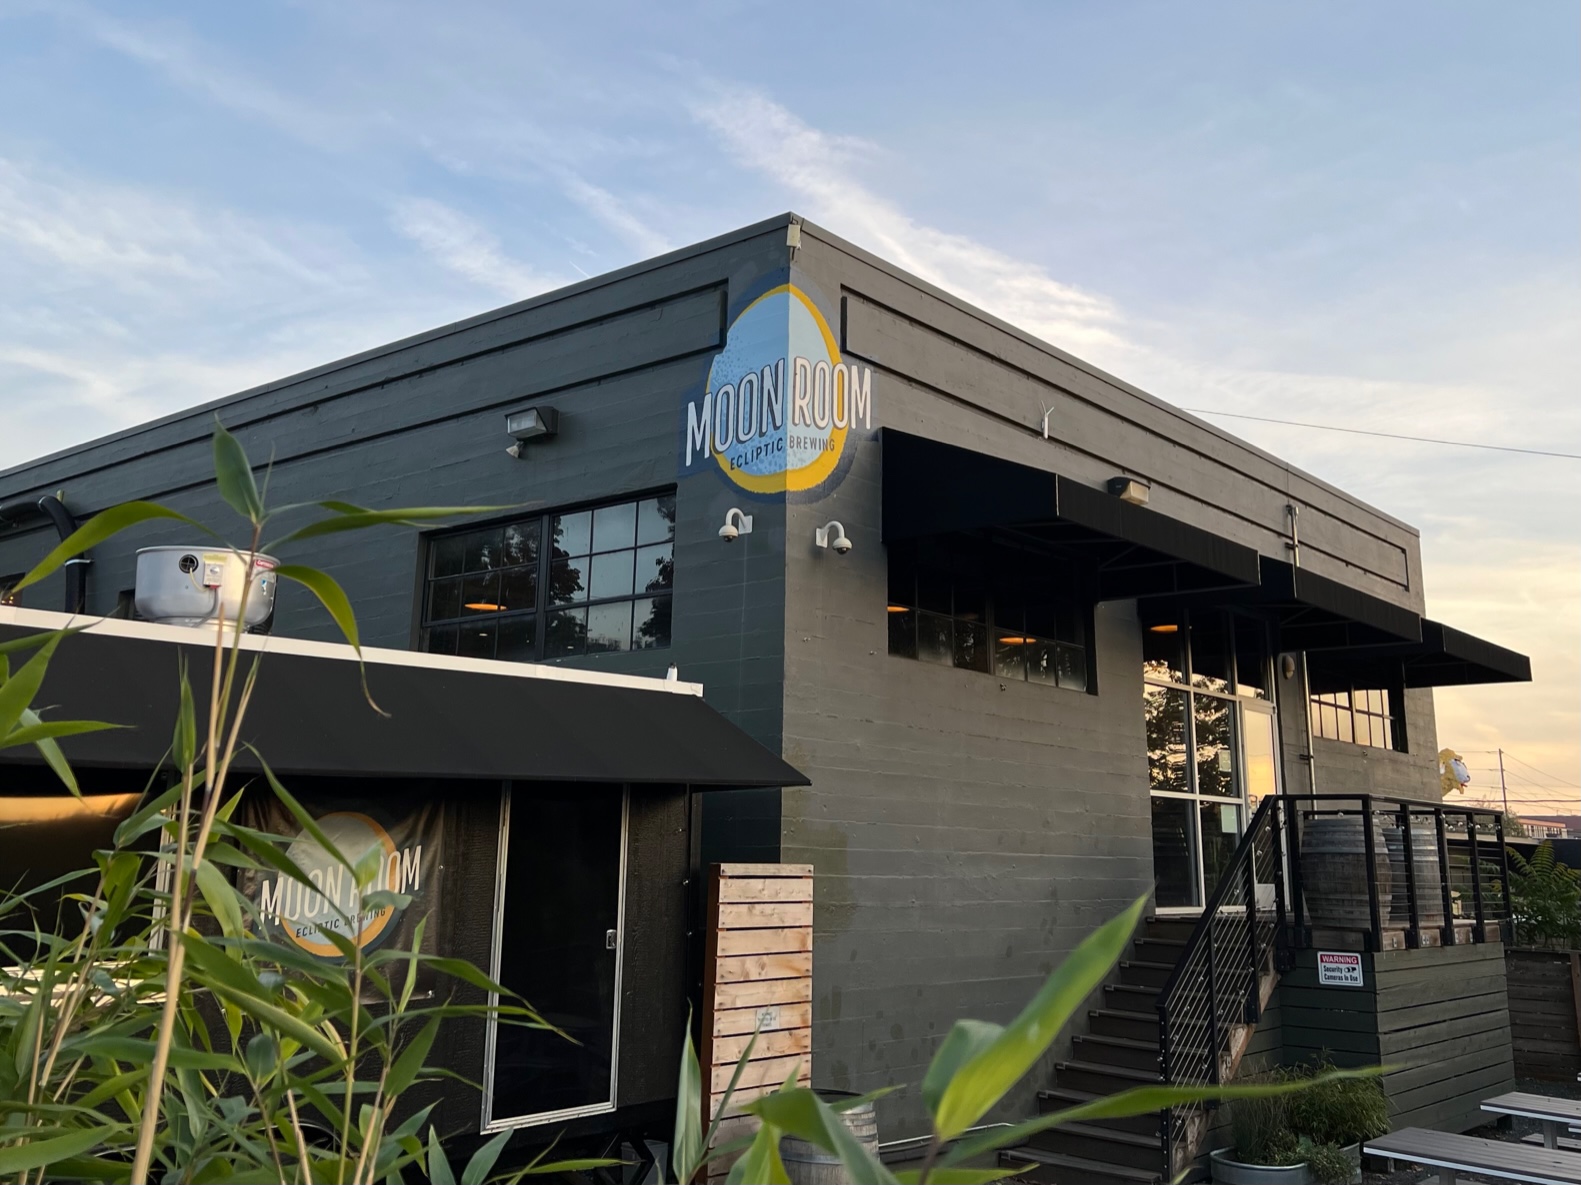 Ecliptic Brewing's Moon Room has re-opened after its July 2022 temporary closure.